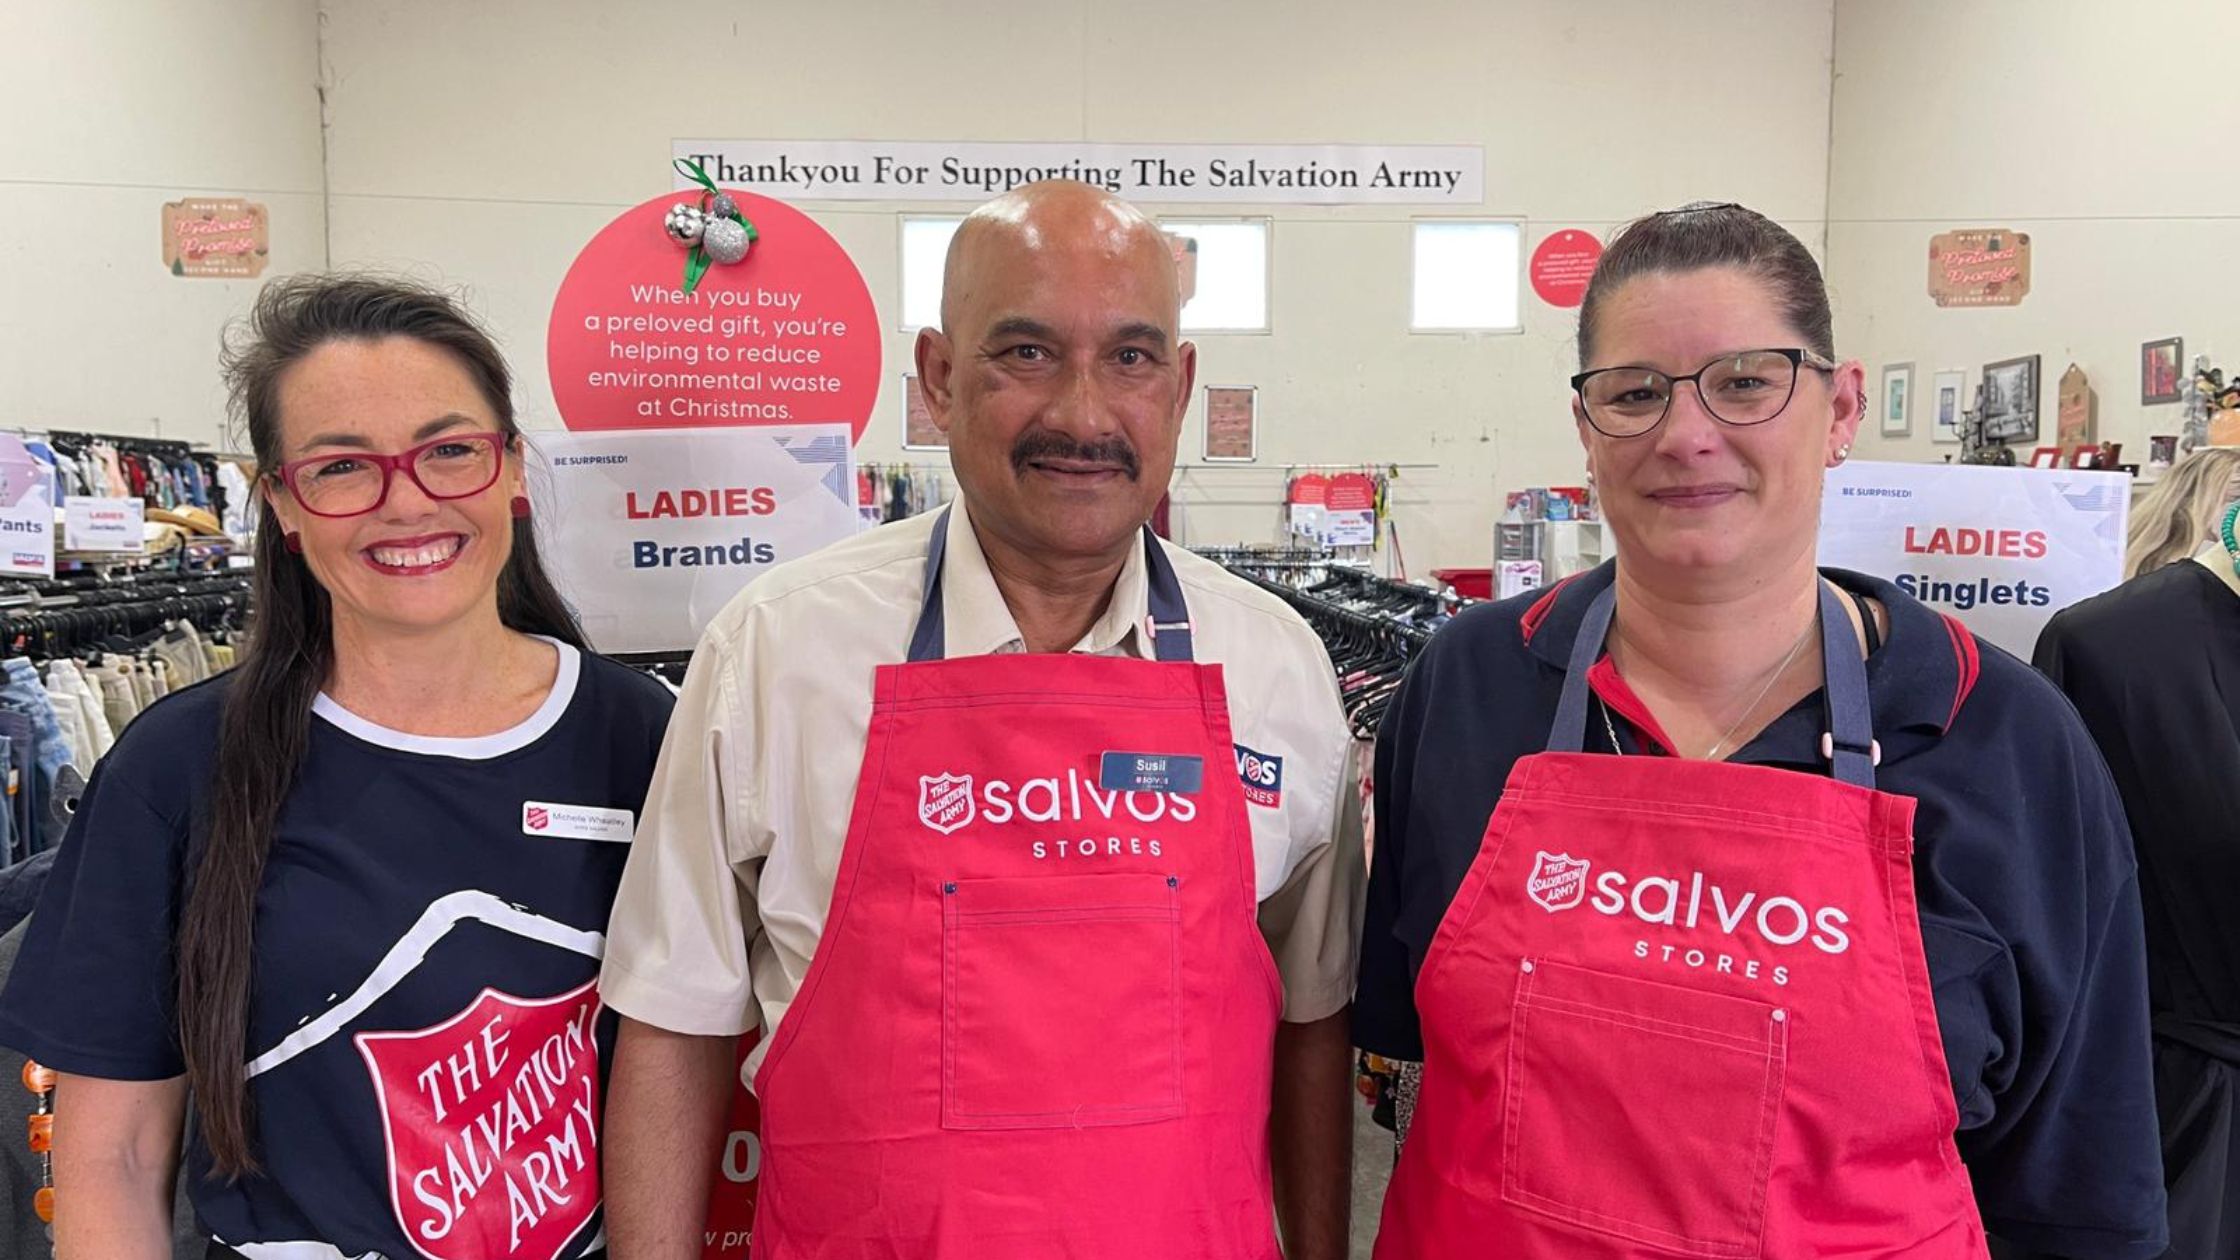 Menai Salvos - a store with a difference